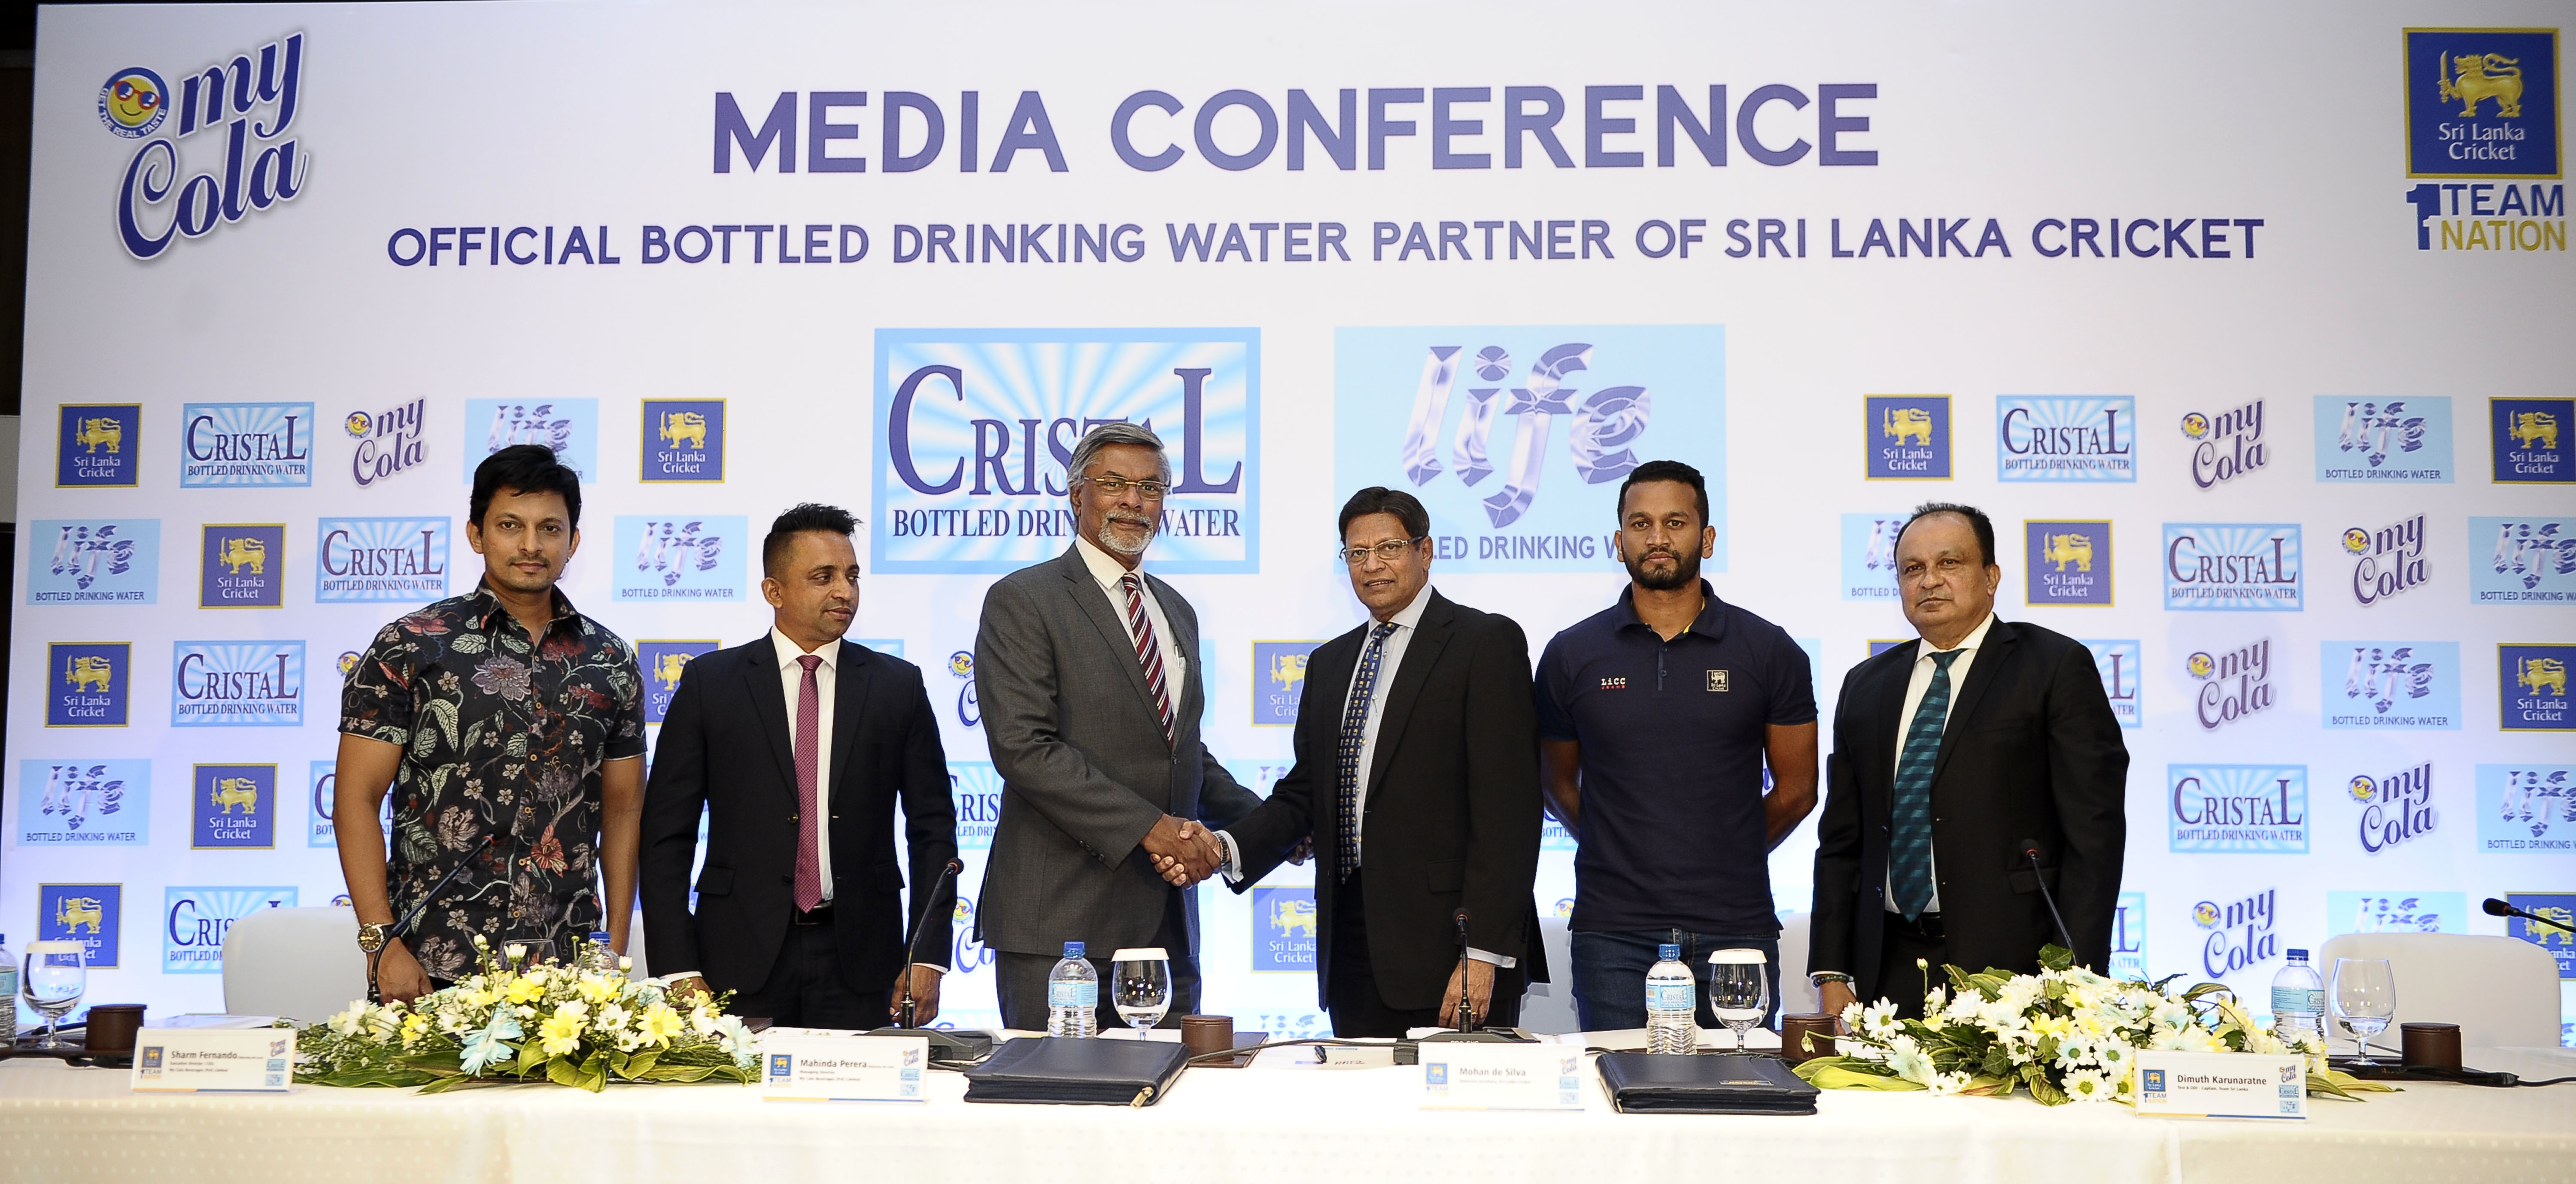 My Cola’s Cristal and Life becomes the ‘’Official Bottled Drinking Water Partner’ of Sri Lanka Cricket